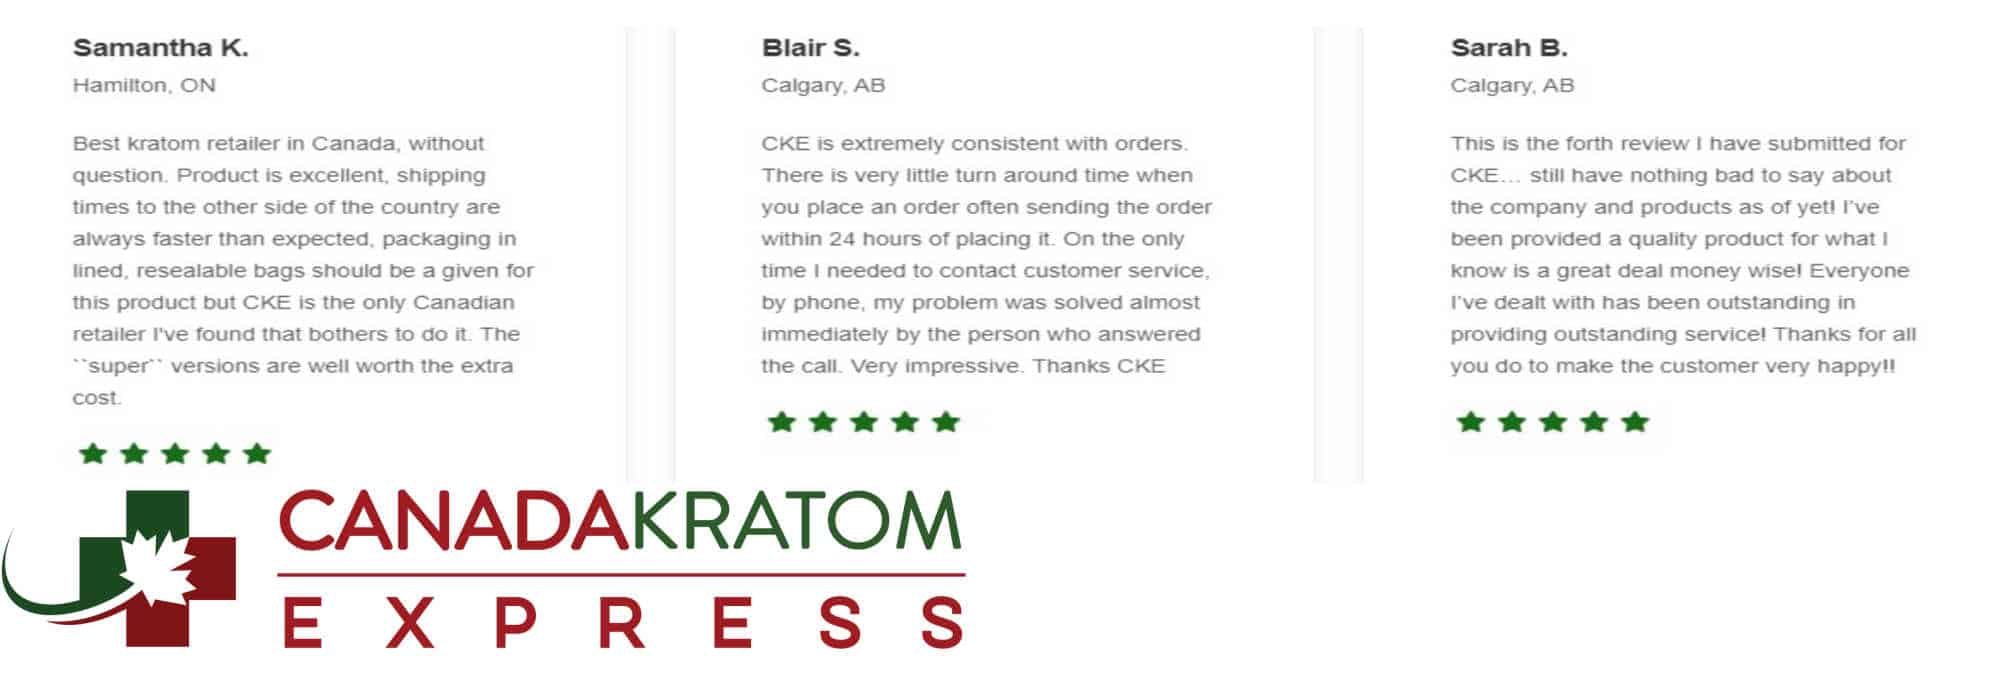 image of canada kratom express product reviews